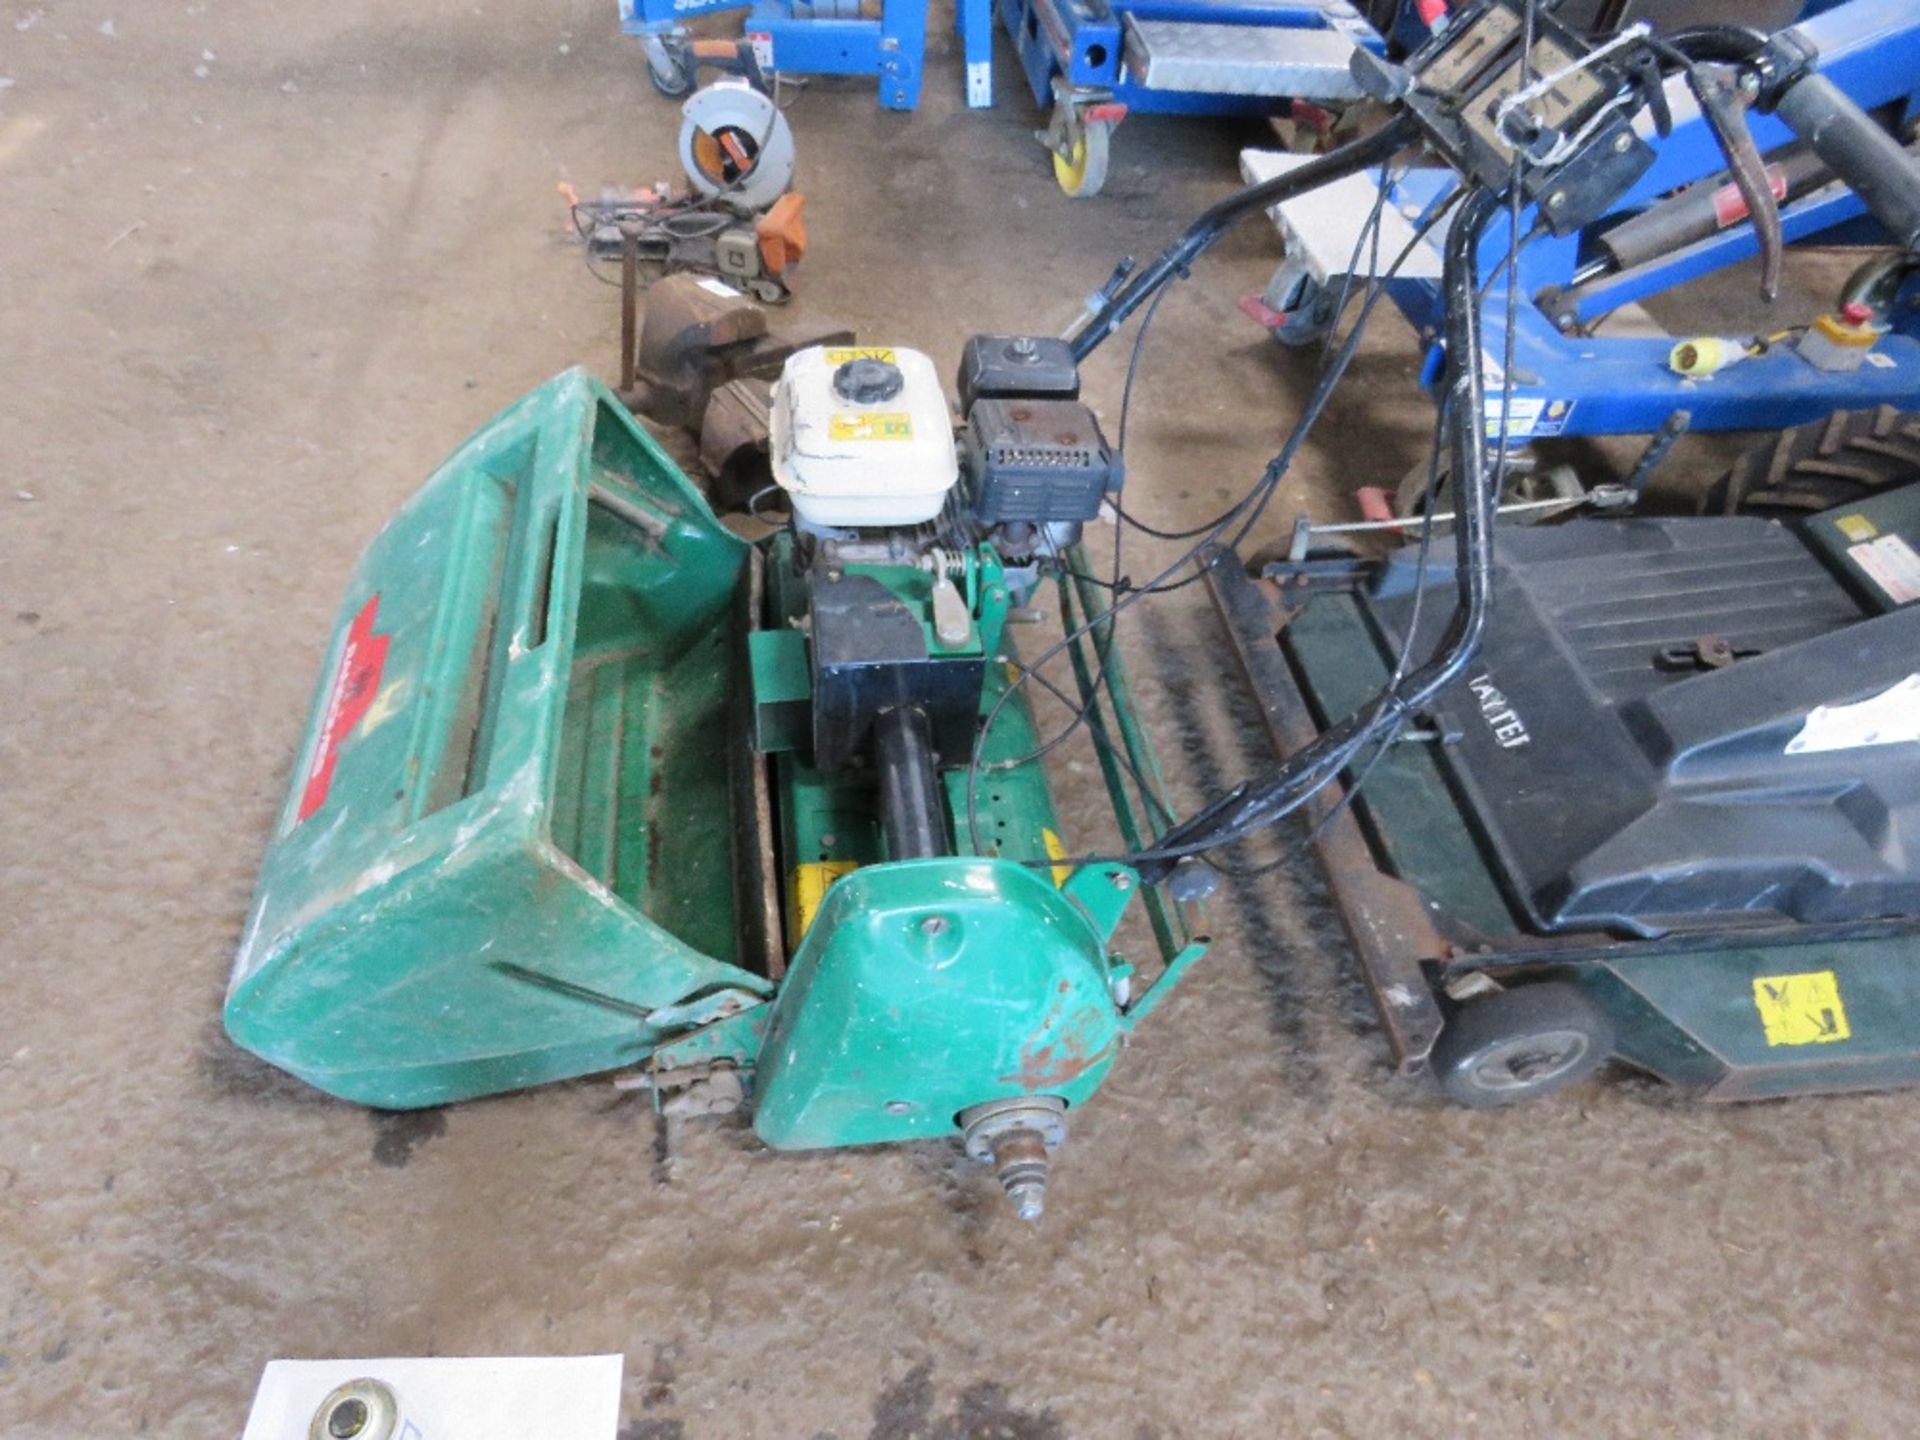 RANSOMES SUPER CERTES 6 CYLINDER MOWER. WHEN TESTED WAS SEEN TO START AND RUN BUT NO DRIVE TO ROLLER - Image 3 of 5